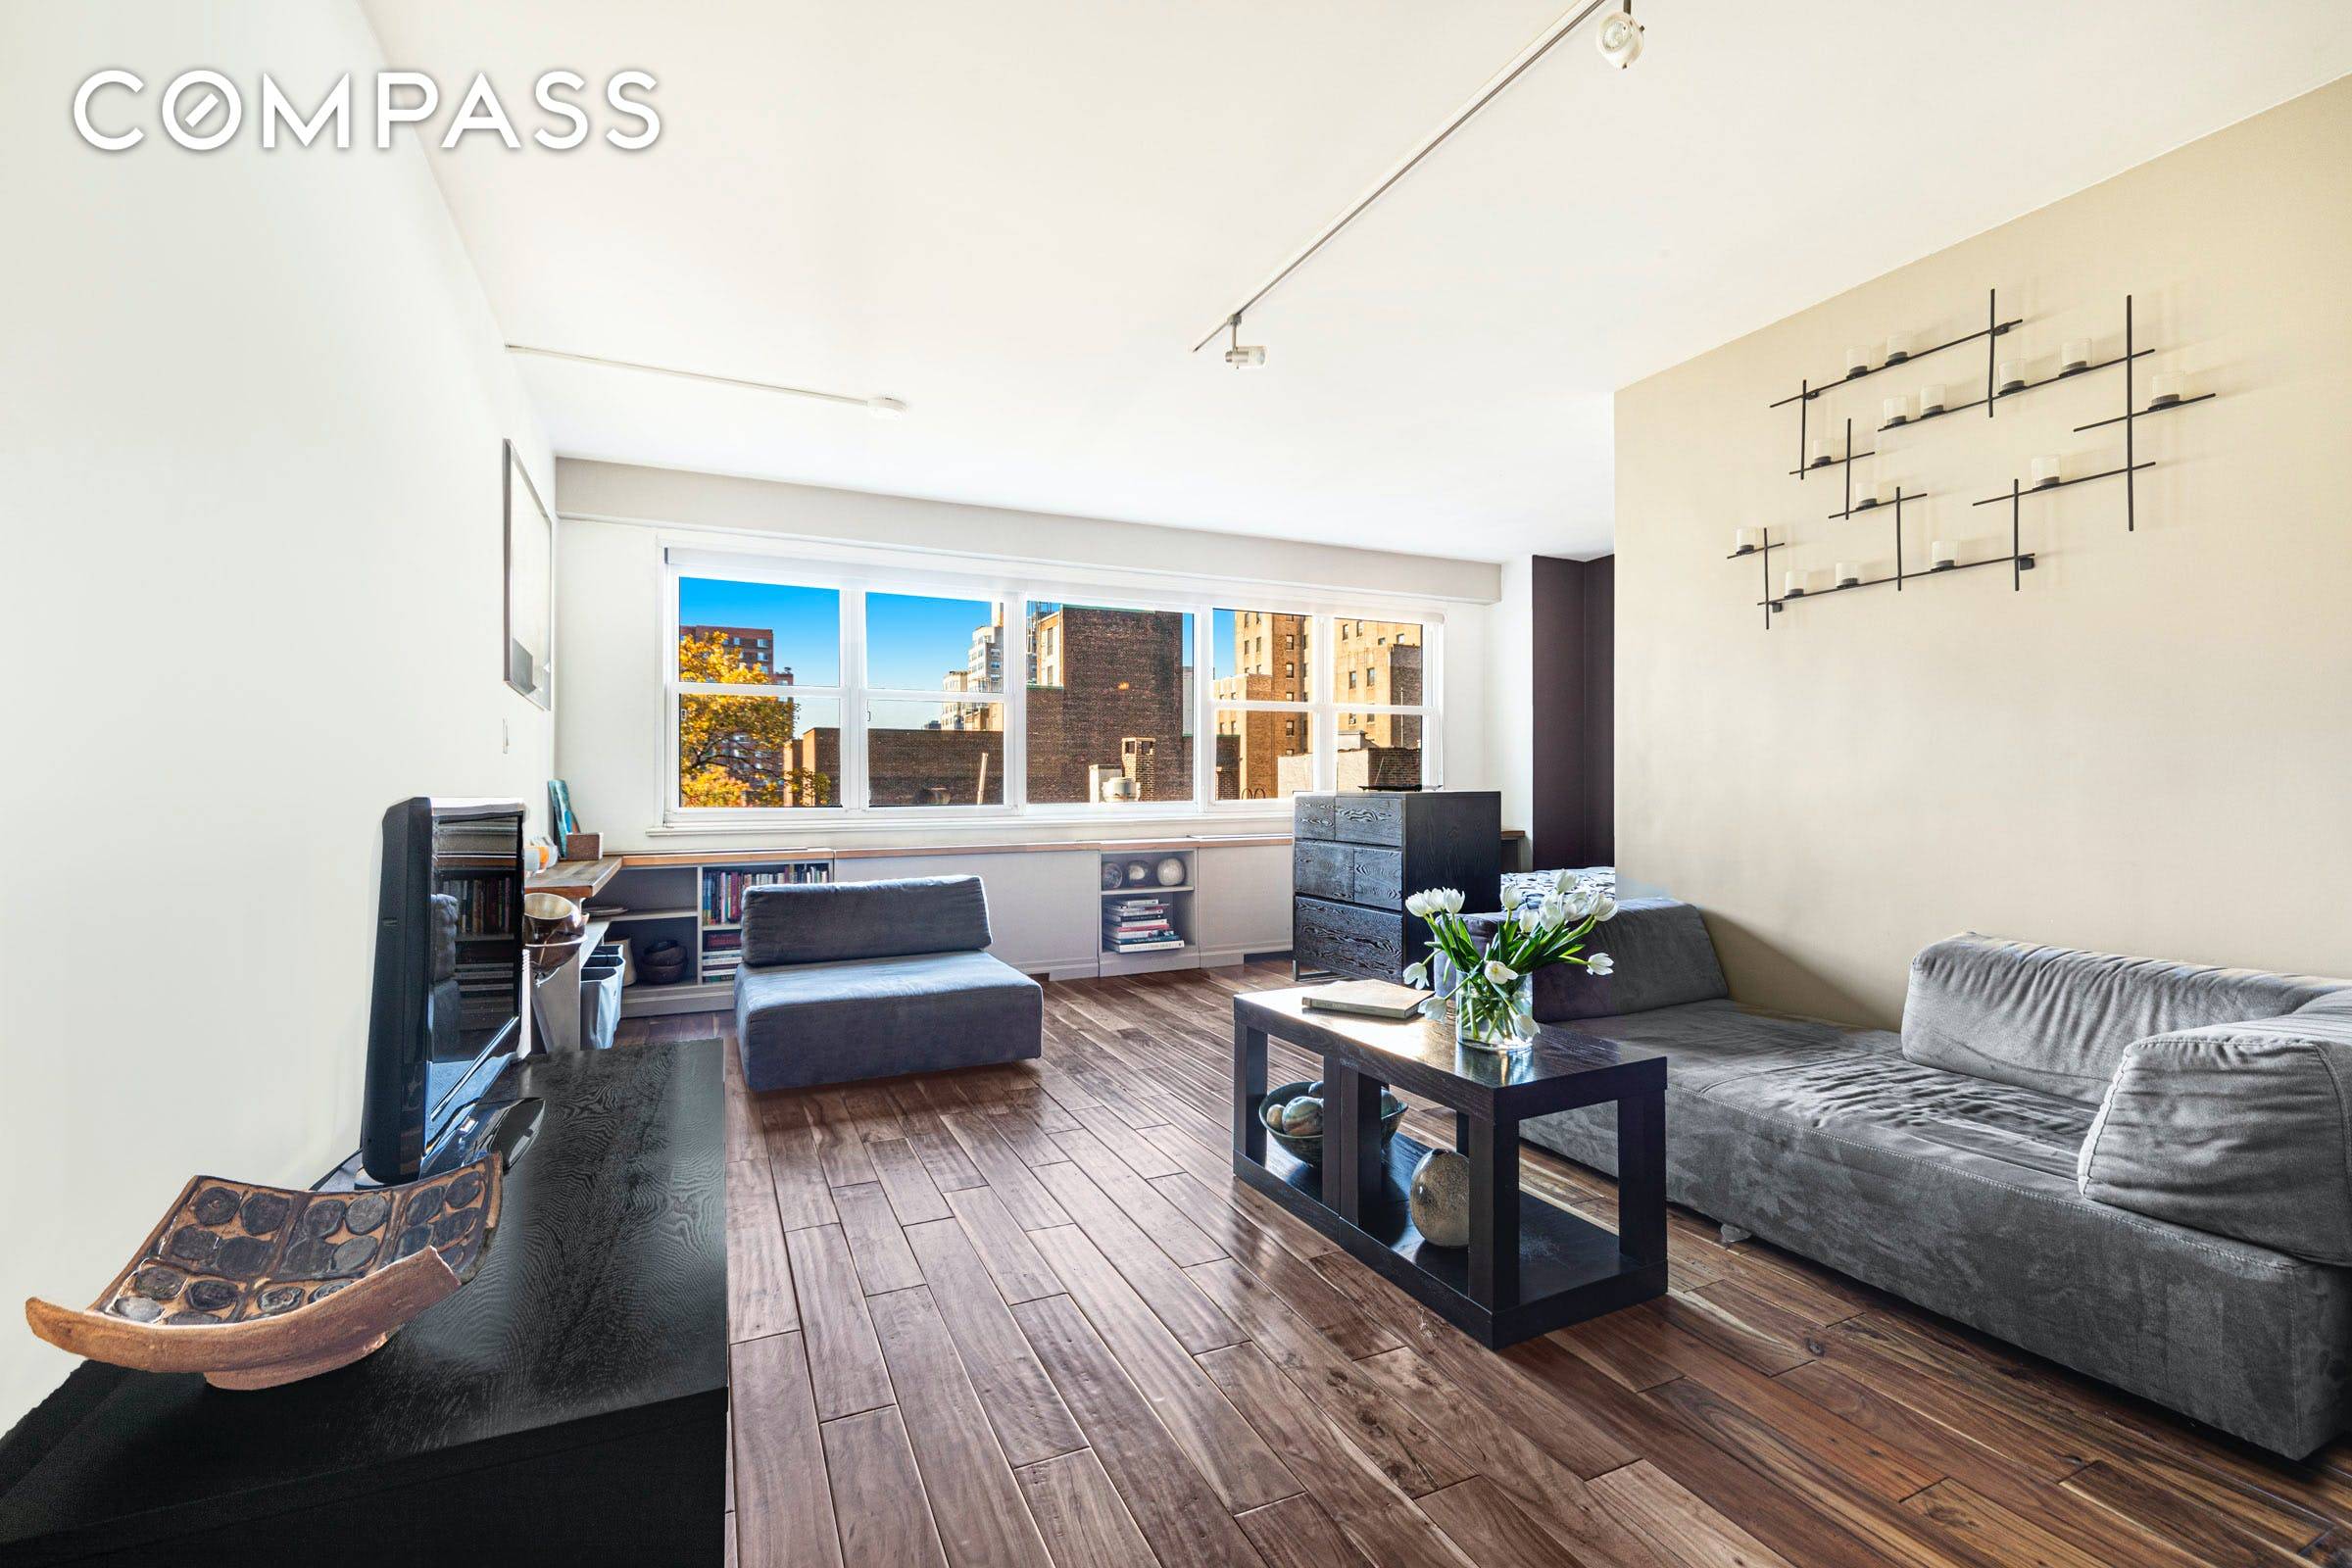 Bring your architect and imagination to this unique opportunity to combine two adjacent studio apartments.